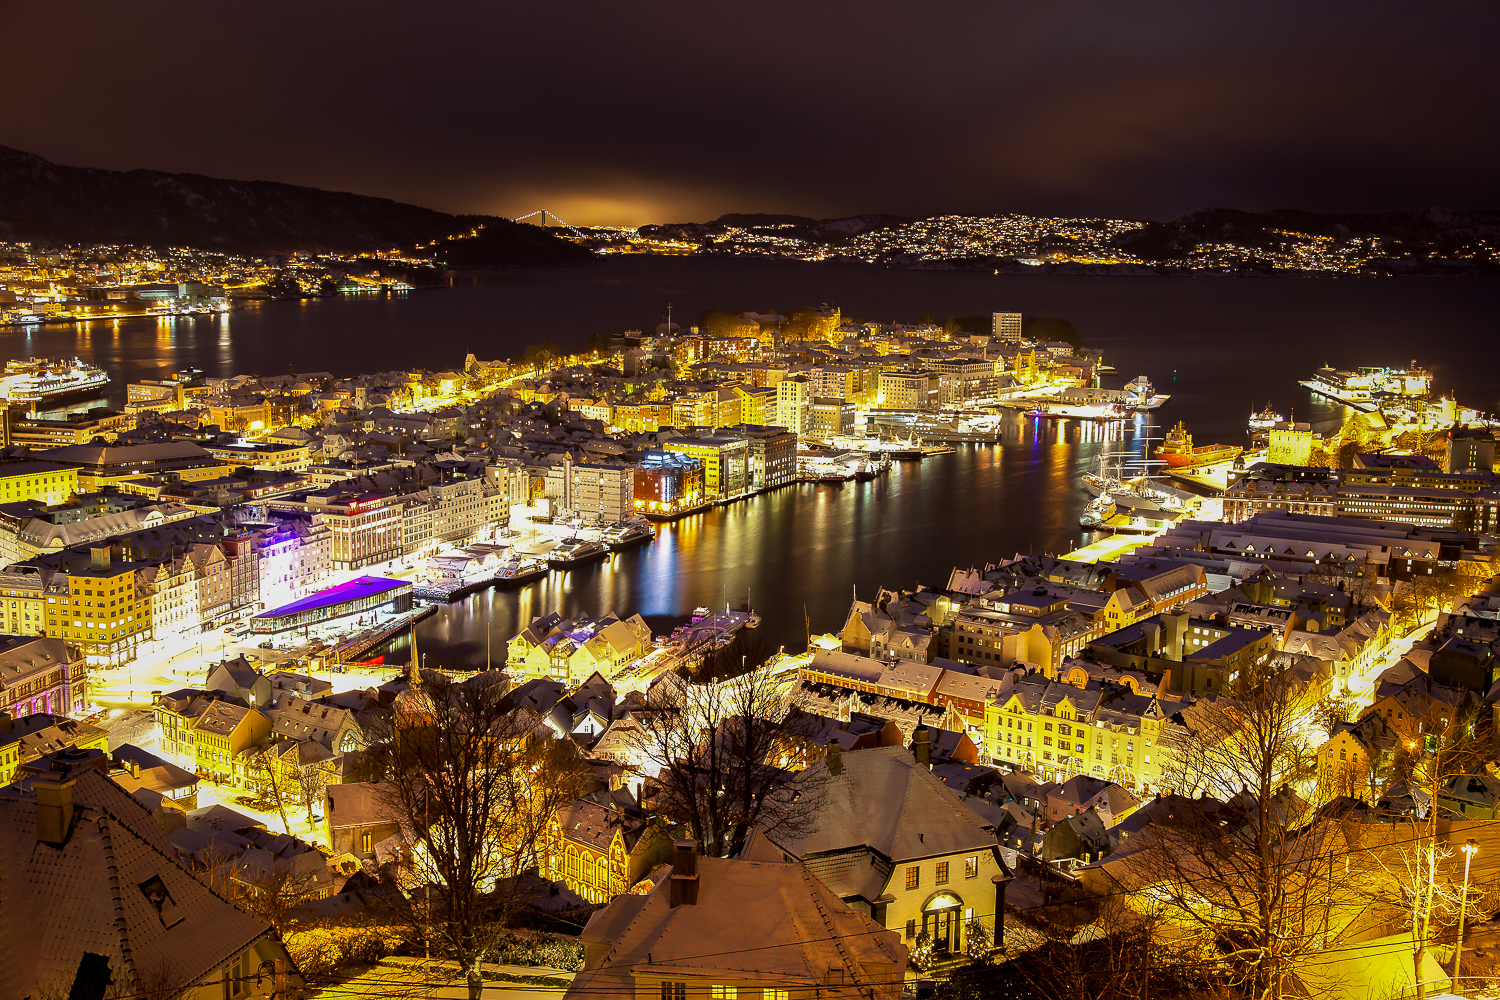 Amazing Photo From Bergen, Norway By Photographer Svein Magne Tunli